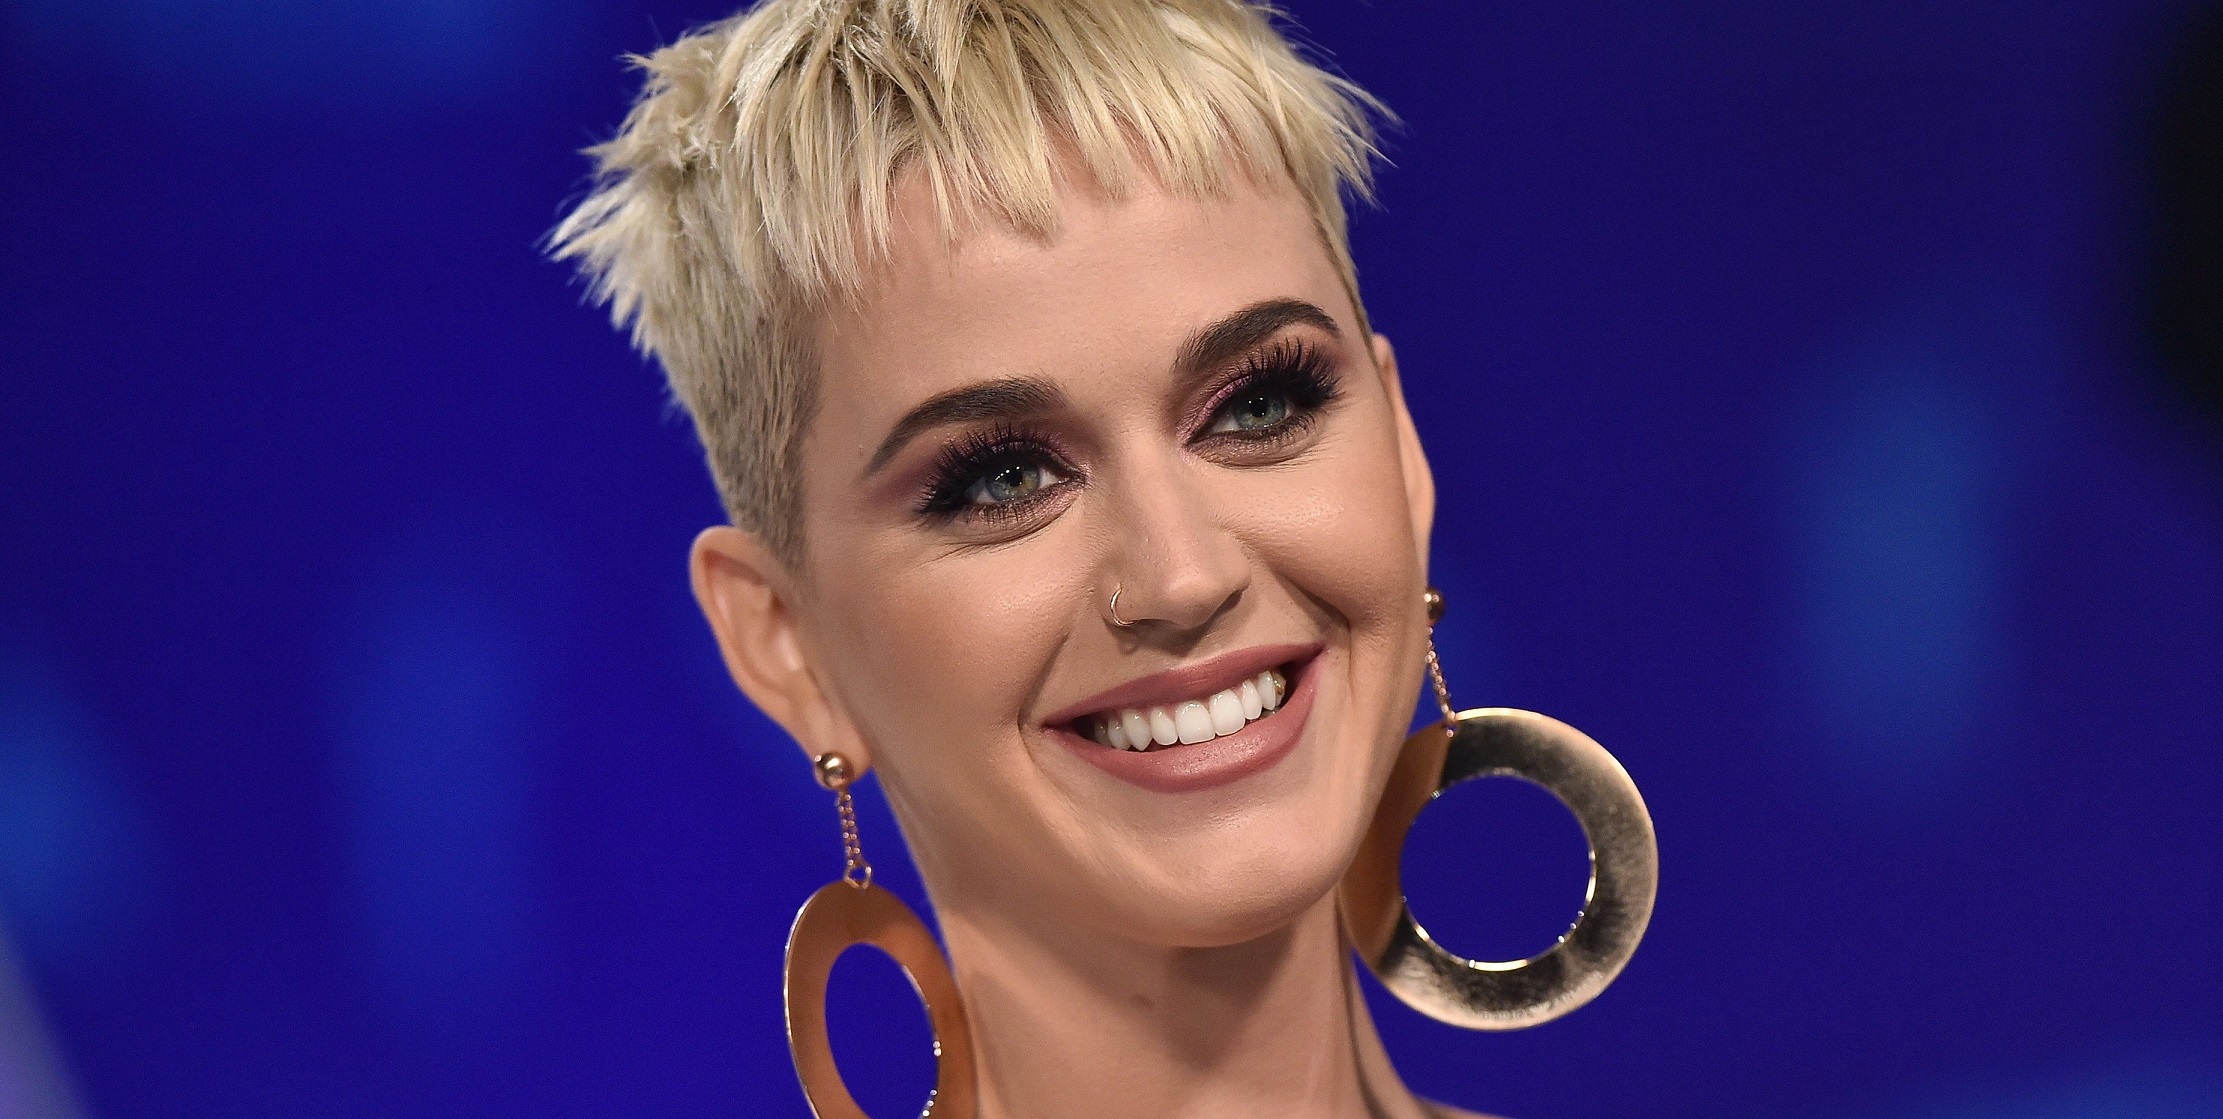 Katy Perry Expresses She’s Tired Of People Pitting Female Artists Against Each Other